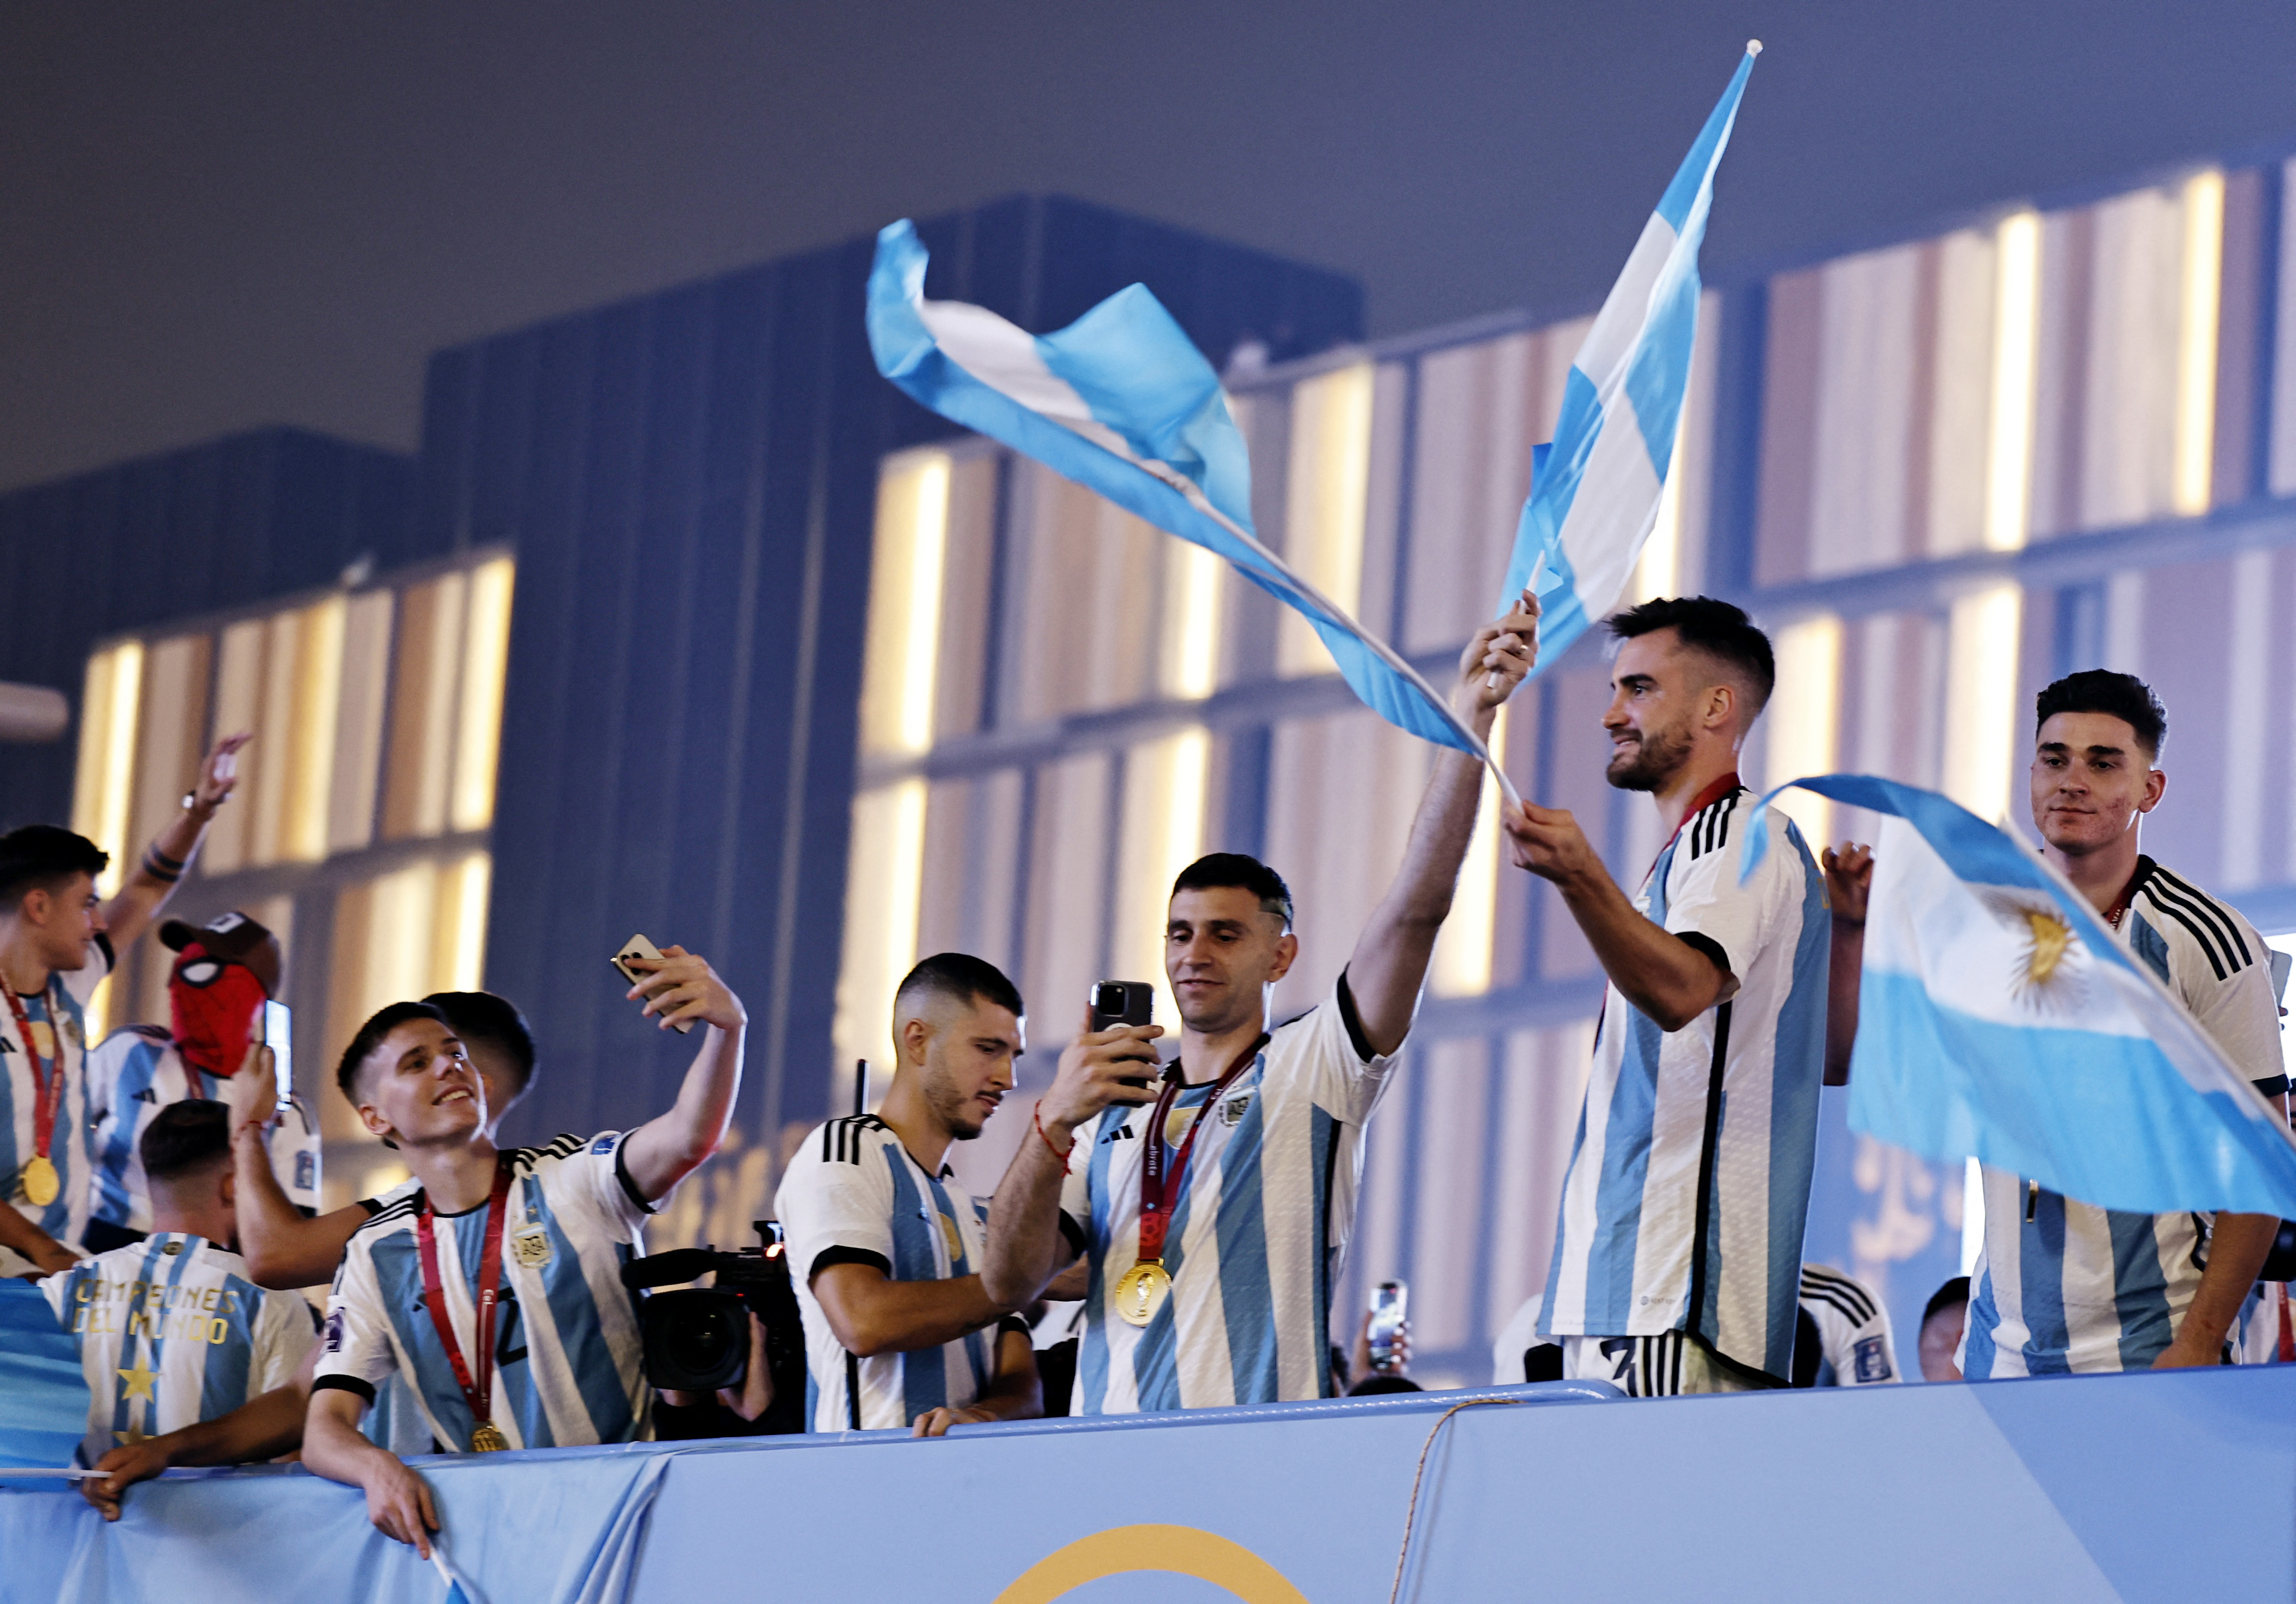 Soccer Football - FIFA World Cup Qatar 2022 - Final - Argentina v France - Lusail Stadium, Lusail, Qatar - December 19, 2022 Argentina players celebrate on a bus outside the stadium after winning the World Cup REUTERS/Hamad I Mohammed